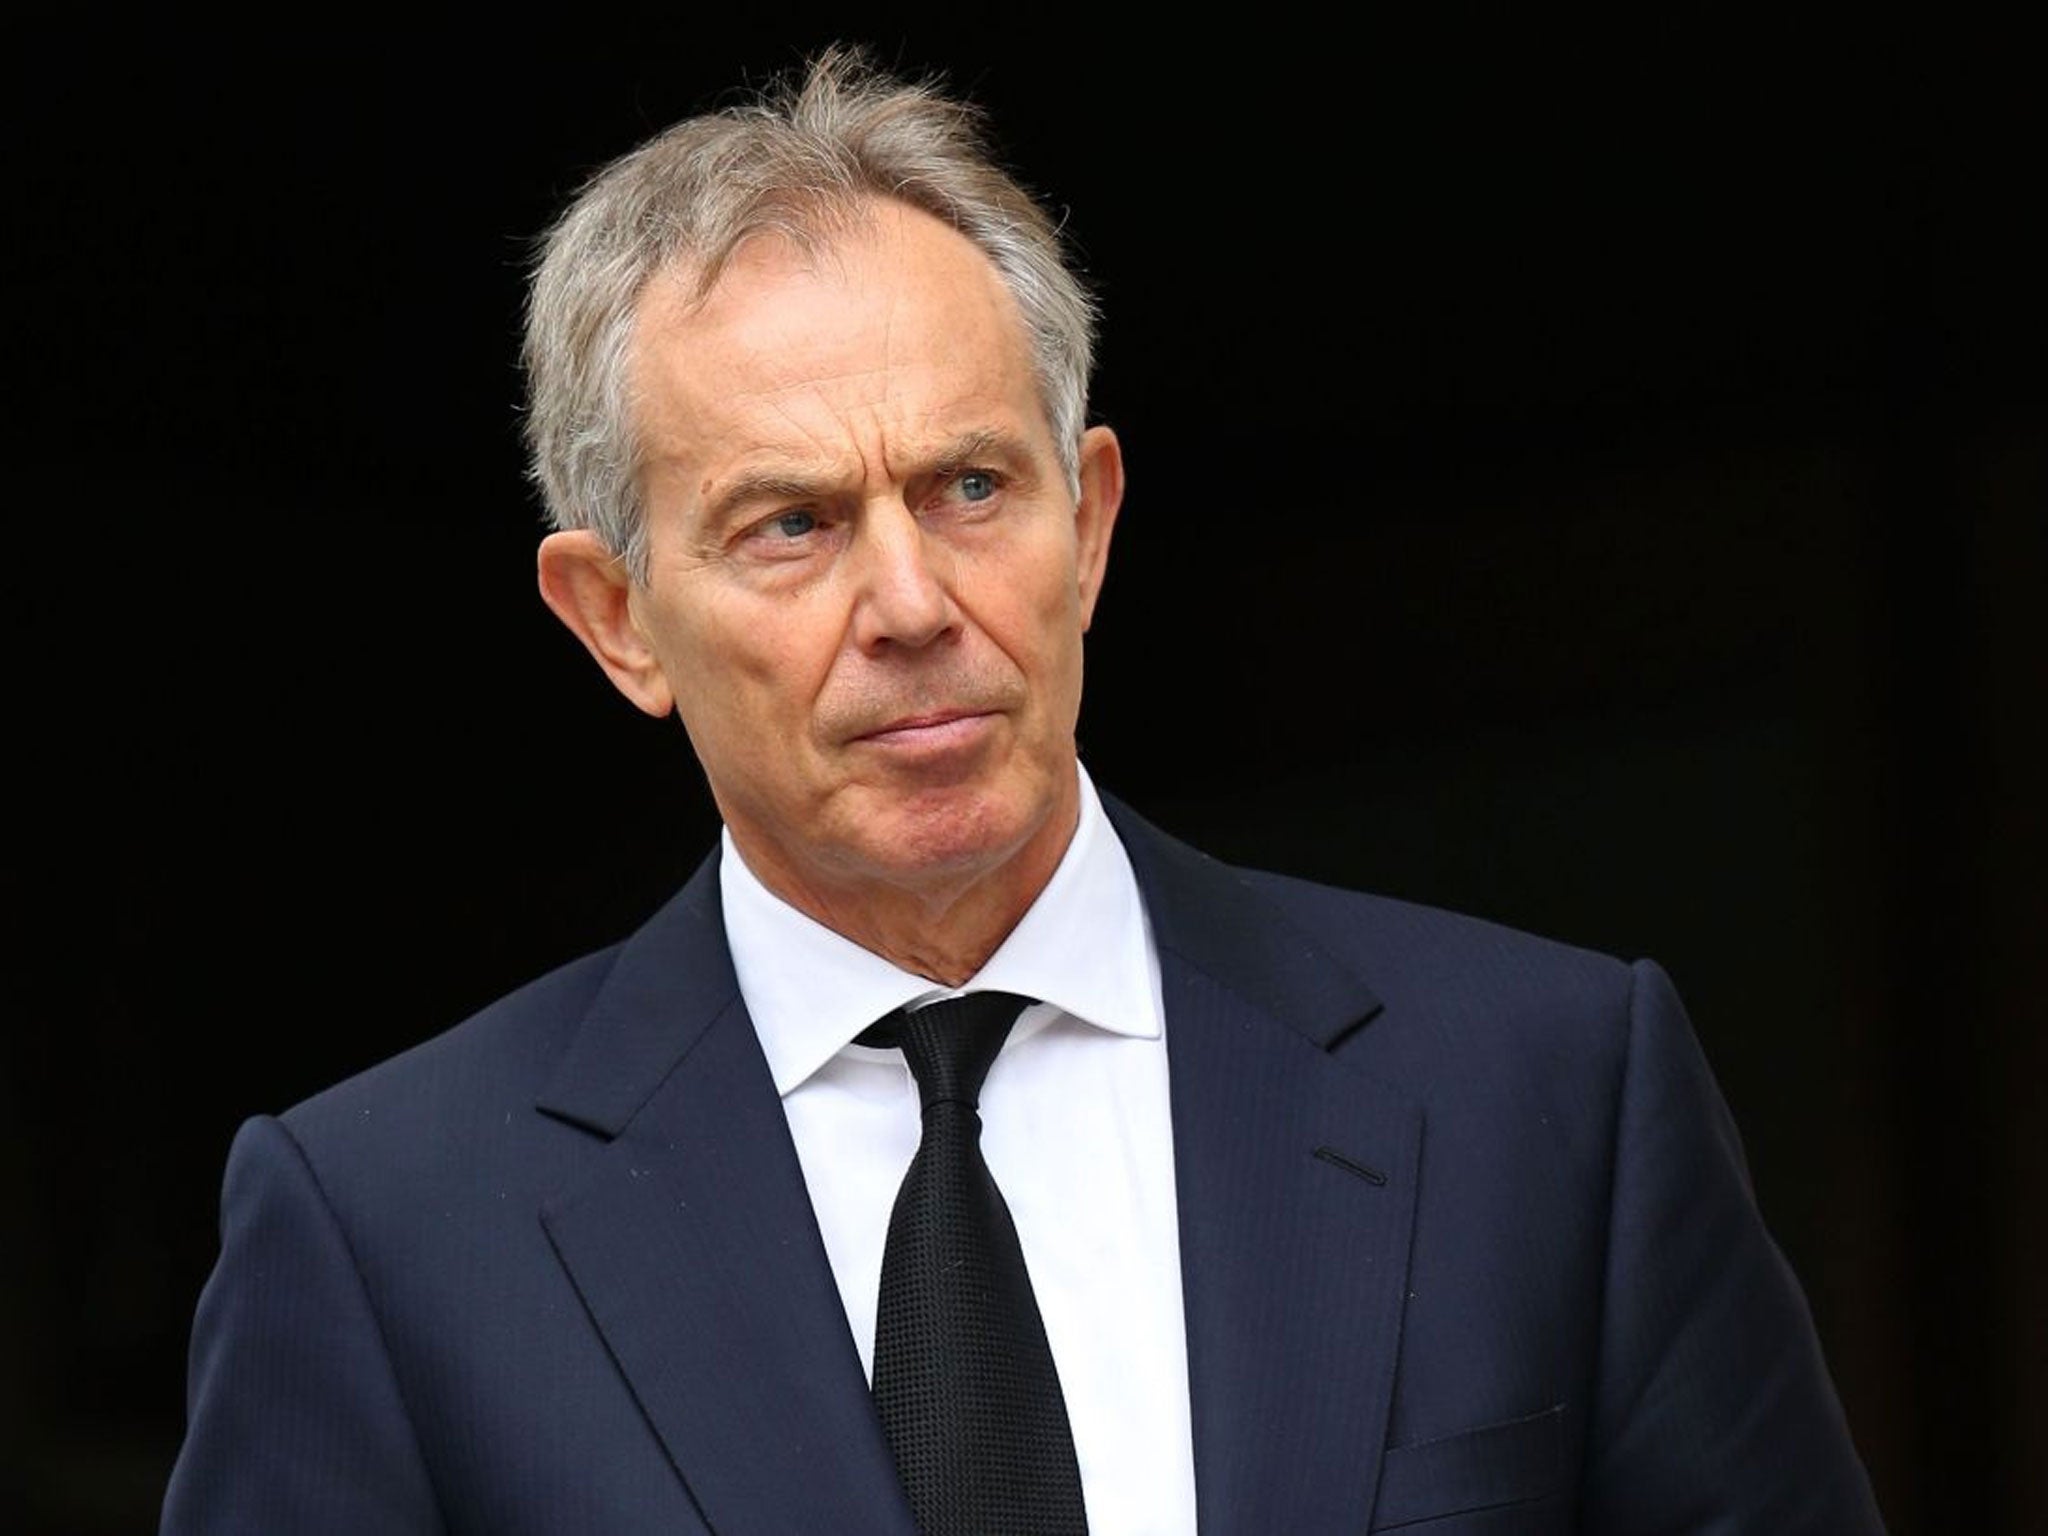 Tony Blair who has insisted he is not the reason for the delay in the publication of the Chilcot Inquiry, saying he has as much interest in knowing the findings as anyone else.